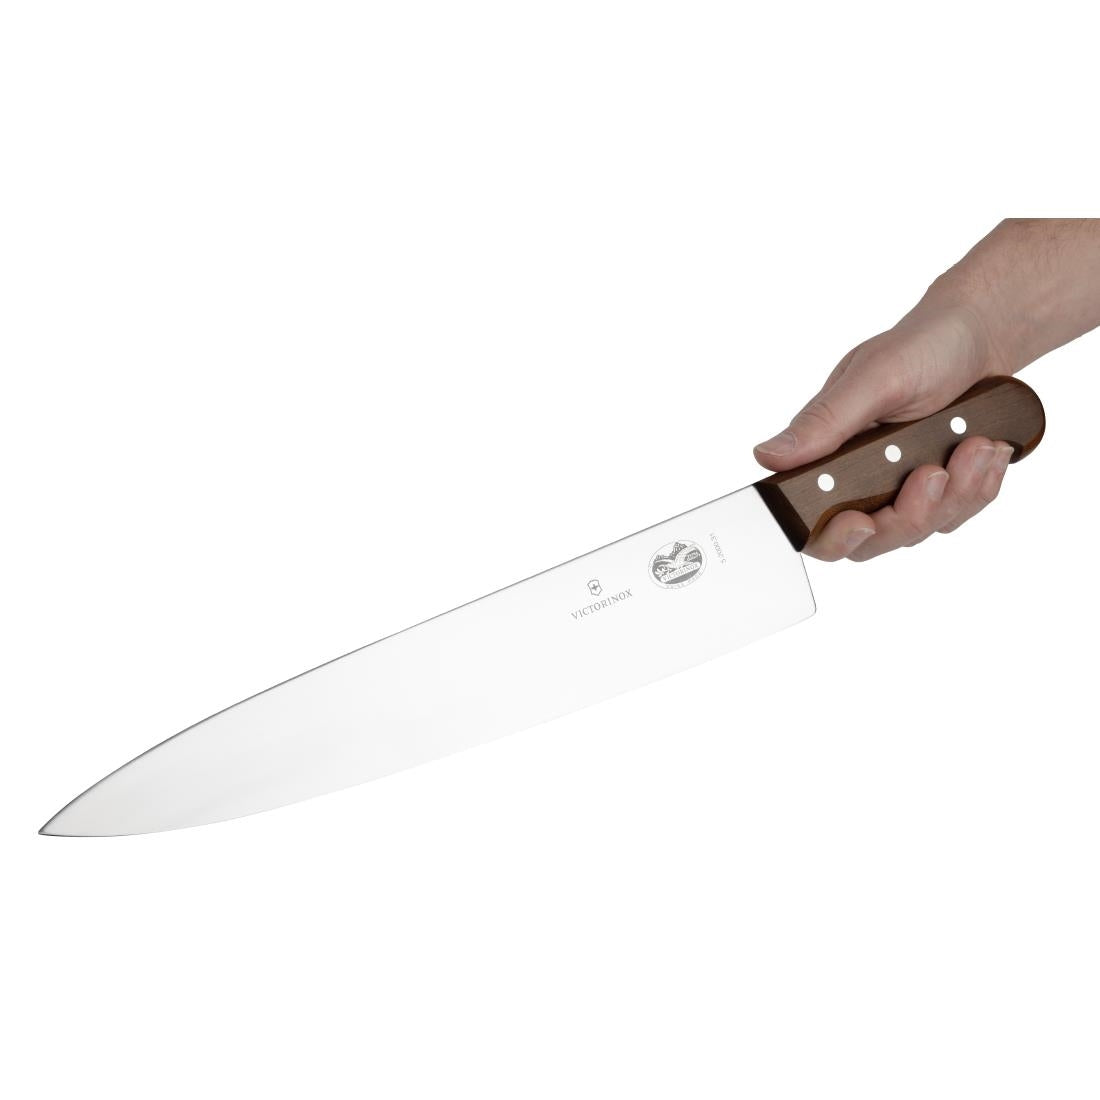 C607 Victorinox Wooden Handled Carving Knife 31cm